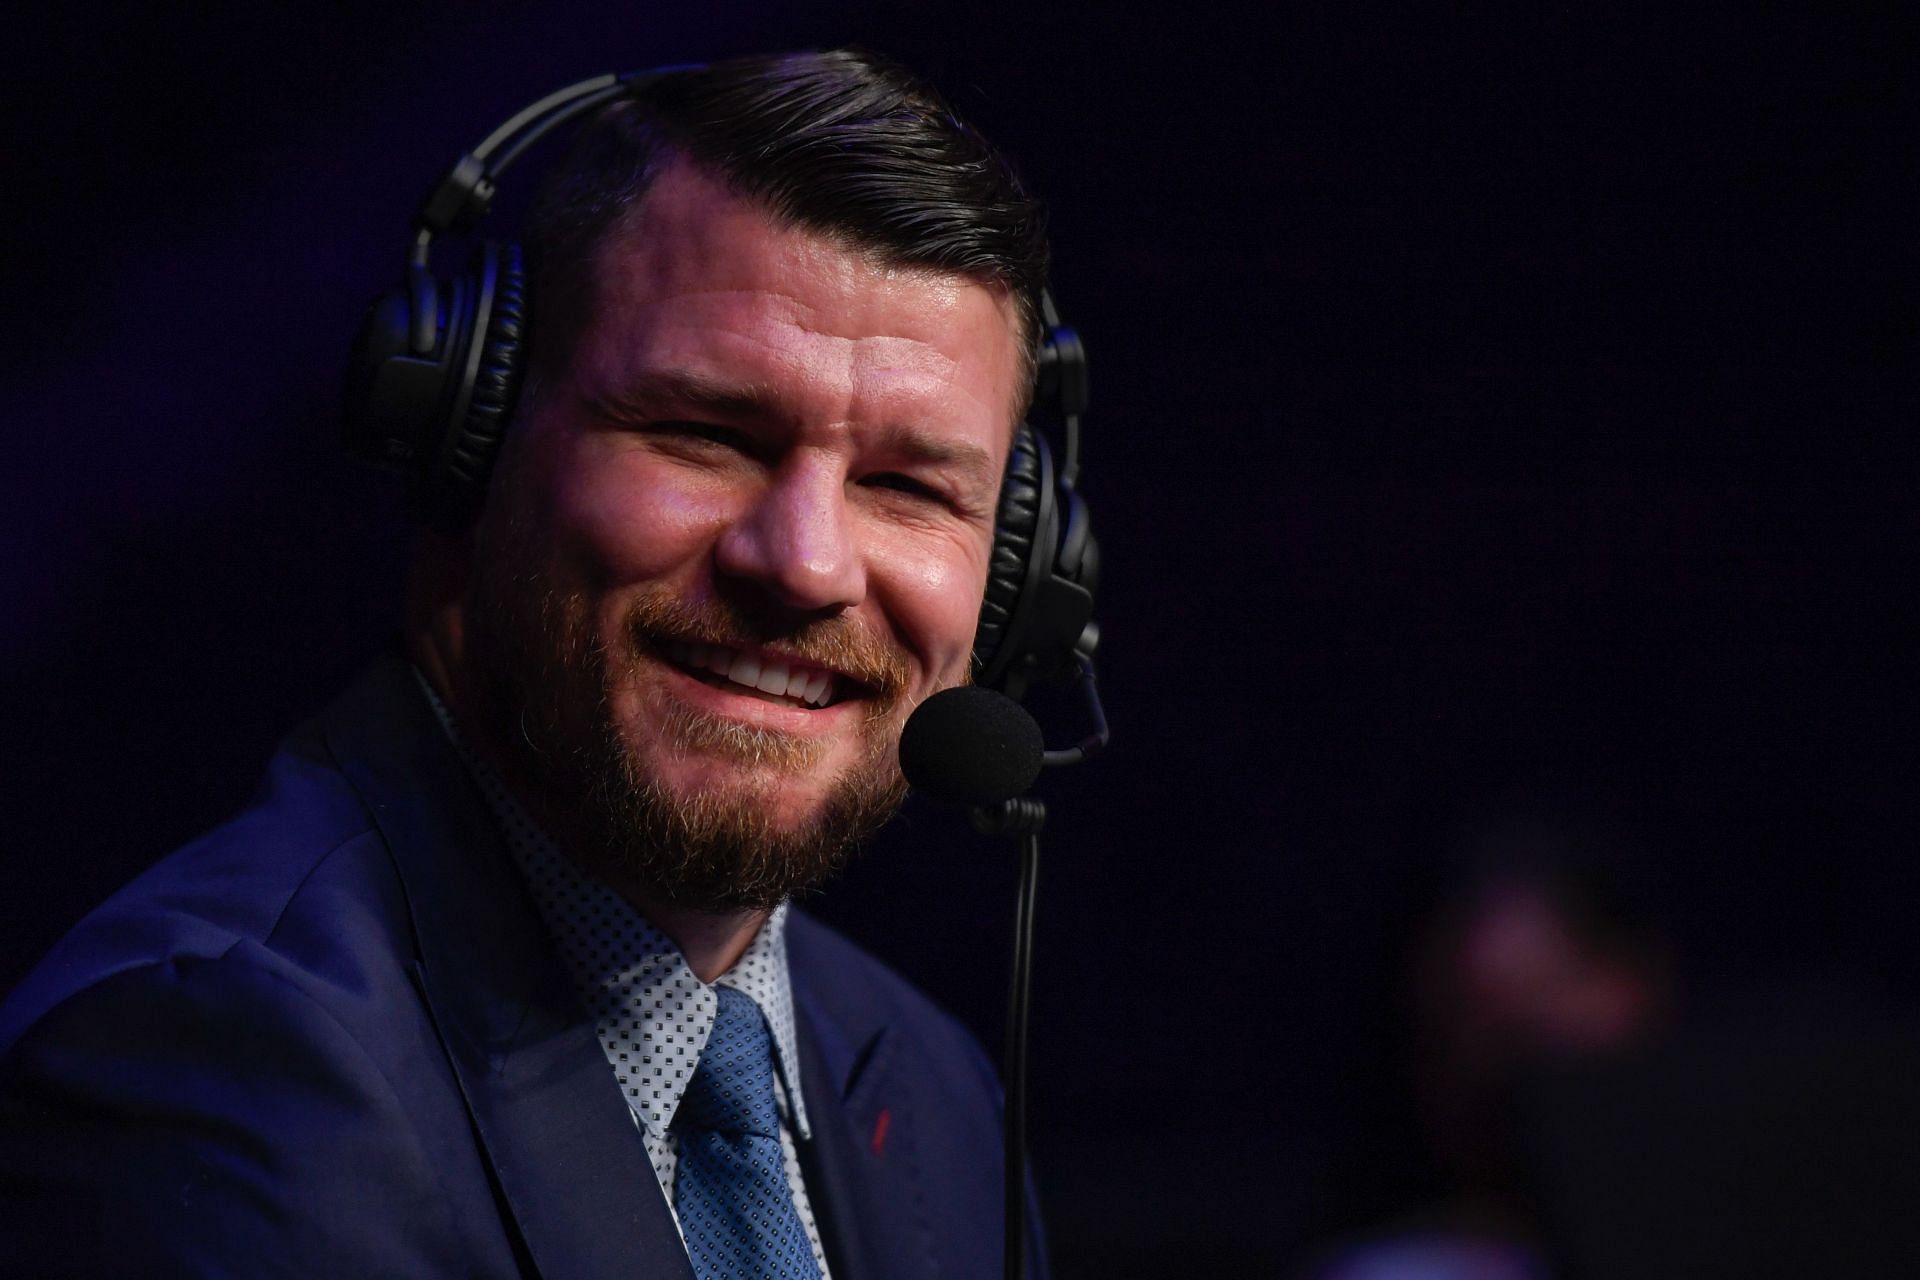 Former UFC middleweight champion Michael Bisping at UFC Fight Night: Overeem vs. Harris [Image courtesy of Getty]